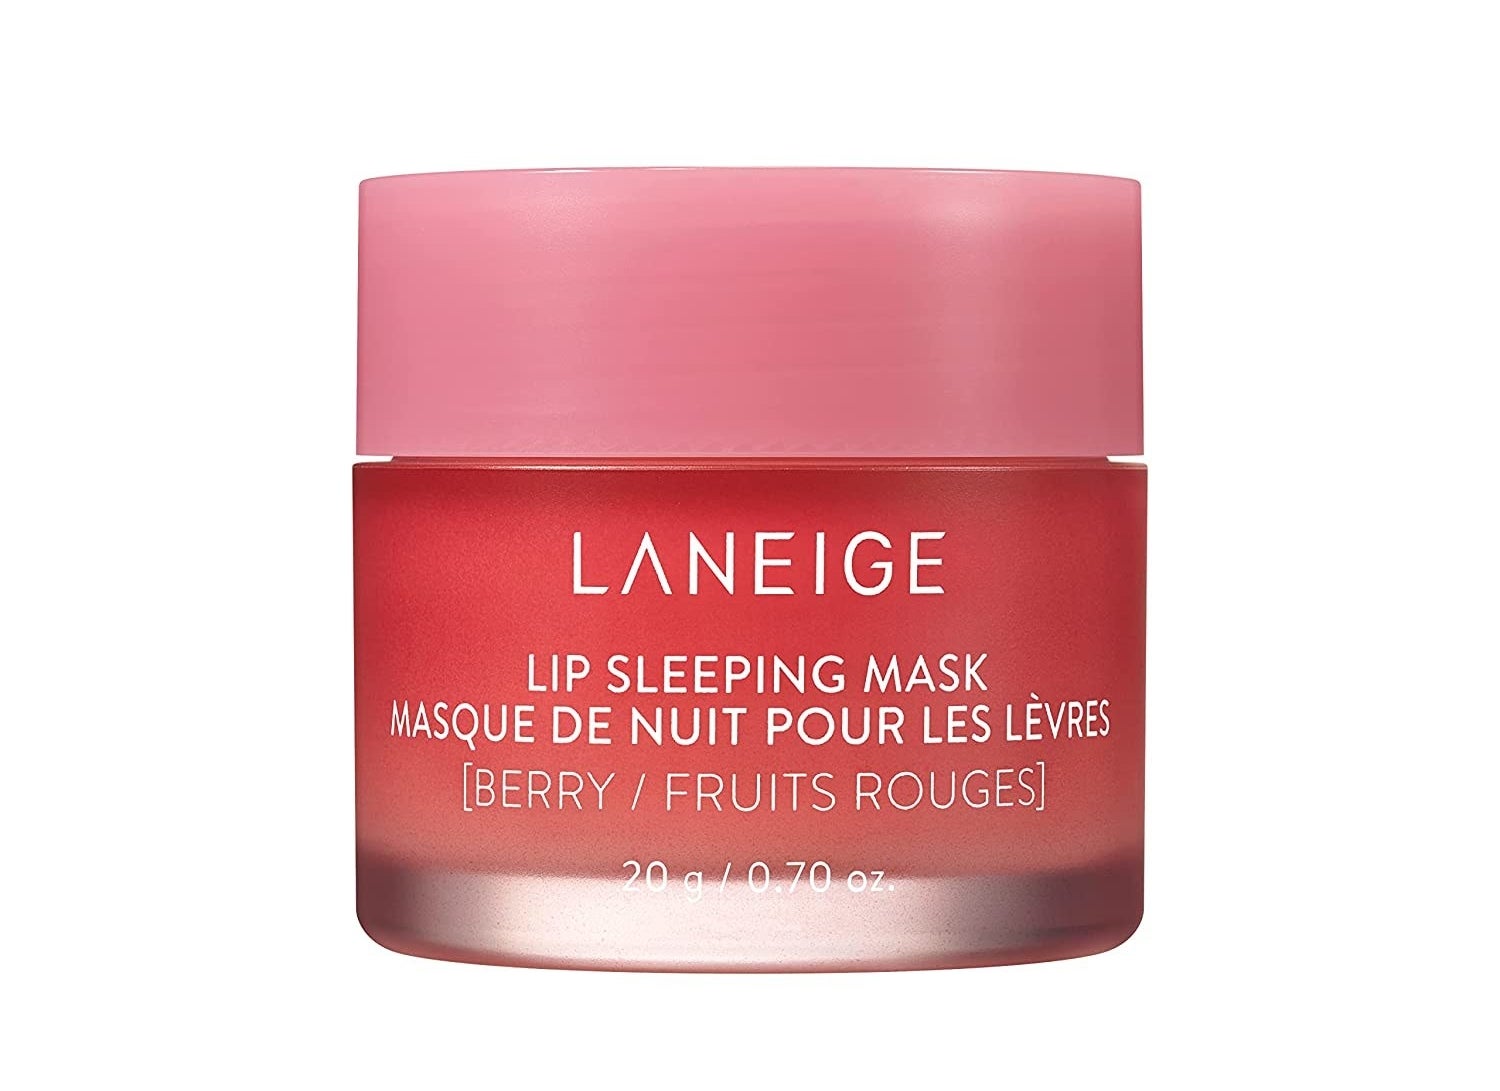 A red container of lip sleeping mask